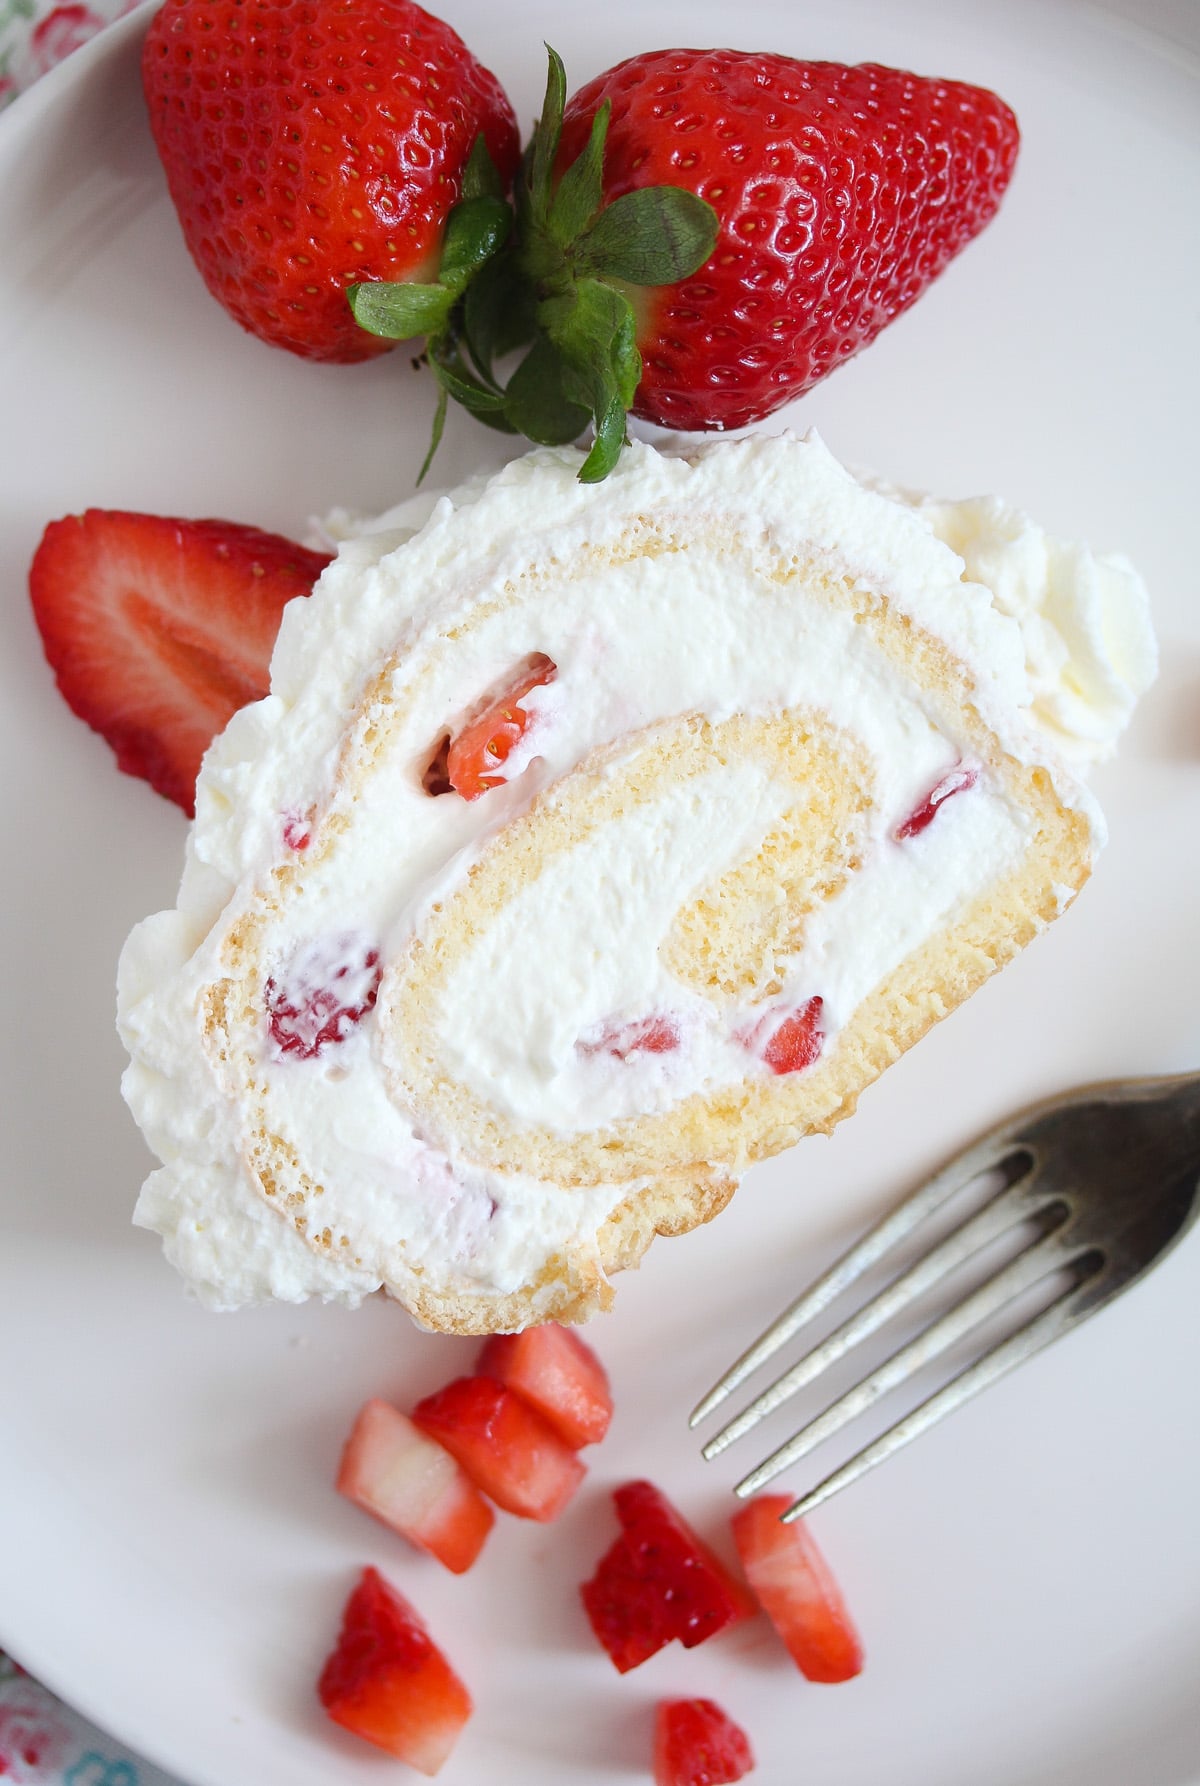 slice of cream cake with berries on a white plate with a fork